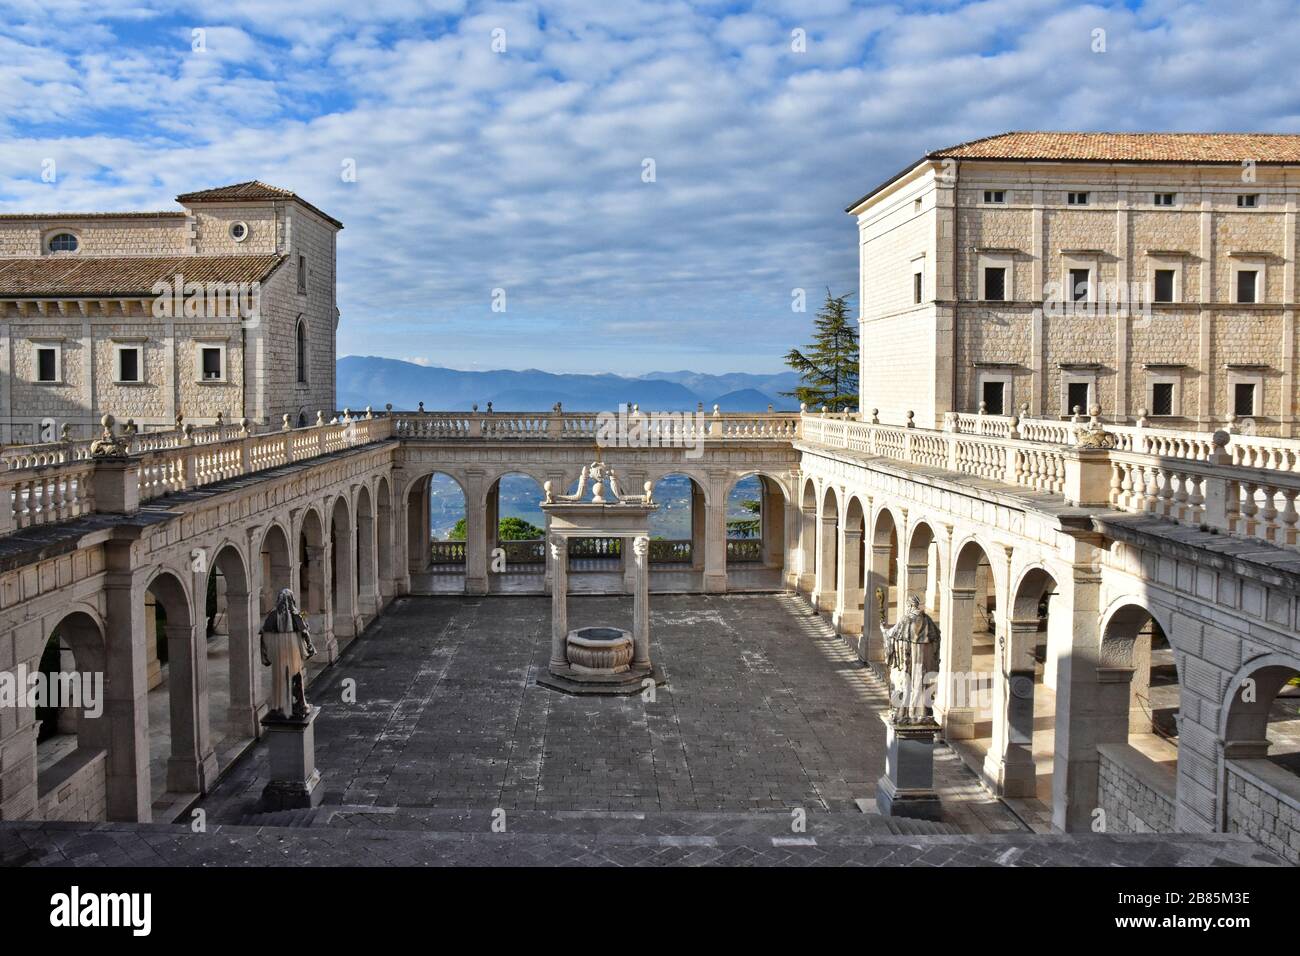 The internal courtyard of the abbey of Monte Cassino, in central Italy Stock Photo